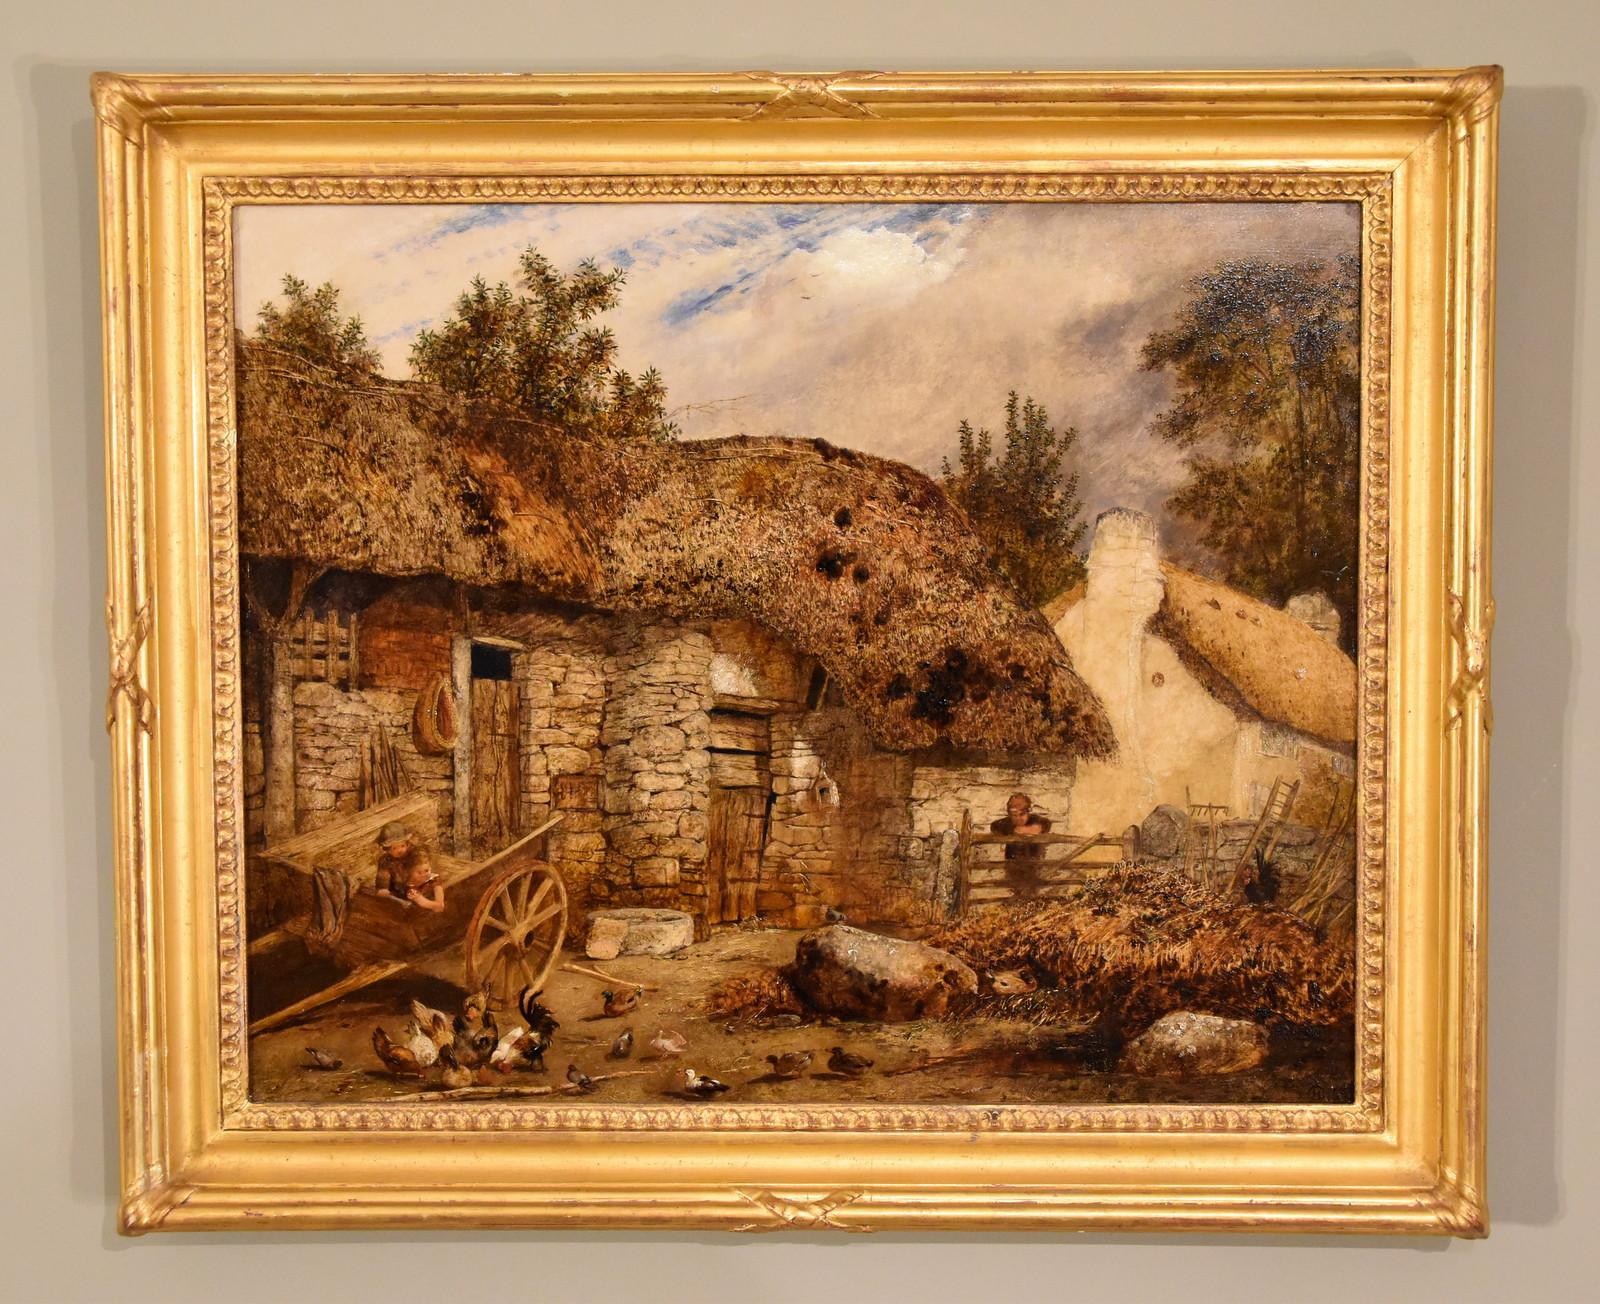 “Feeding the chickens” by John Henry Dell 1830- 1888 was a London landscape and rustic genre painter who exhibited at the royal academy, royal society and British Institution. Oil on panel. Signed monogram and dated 1856

Dimensions unframed
height